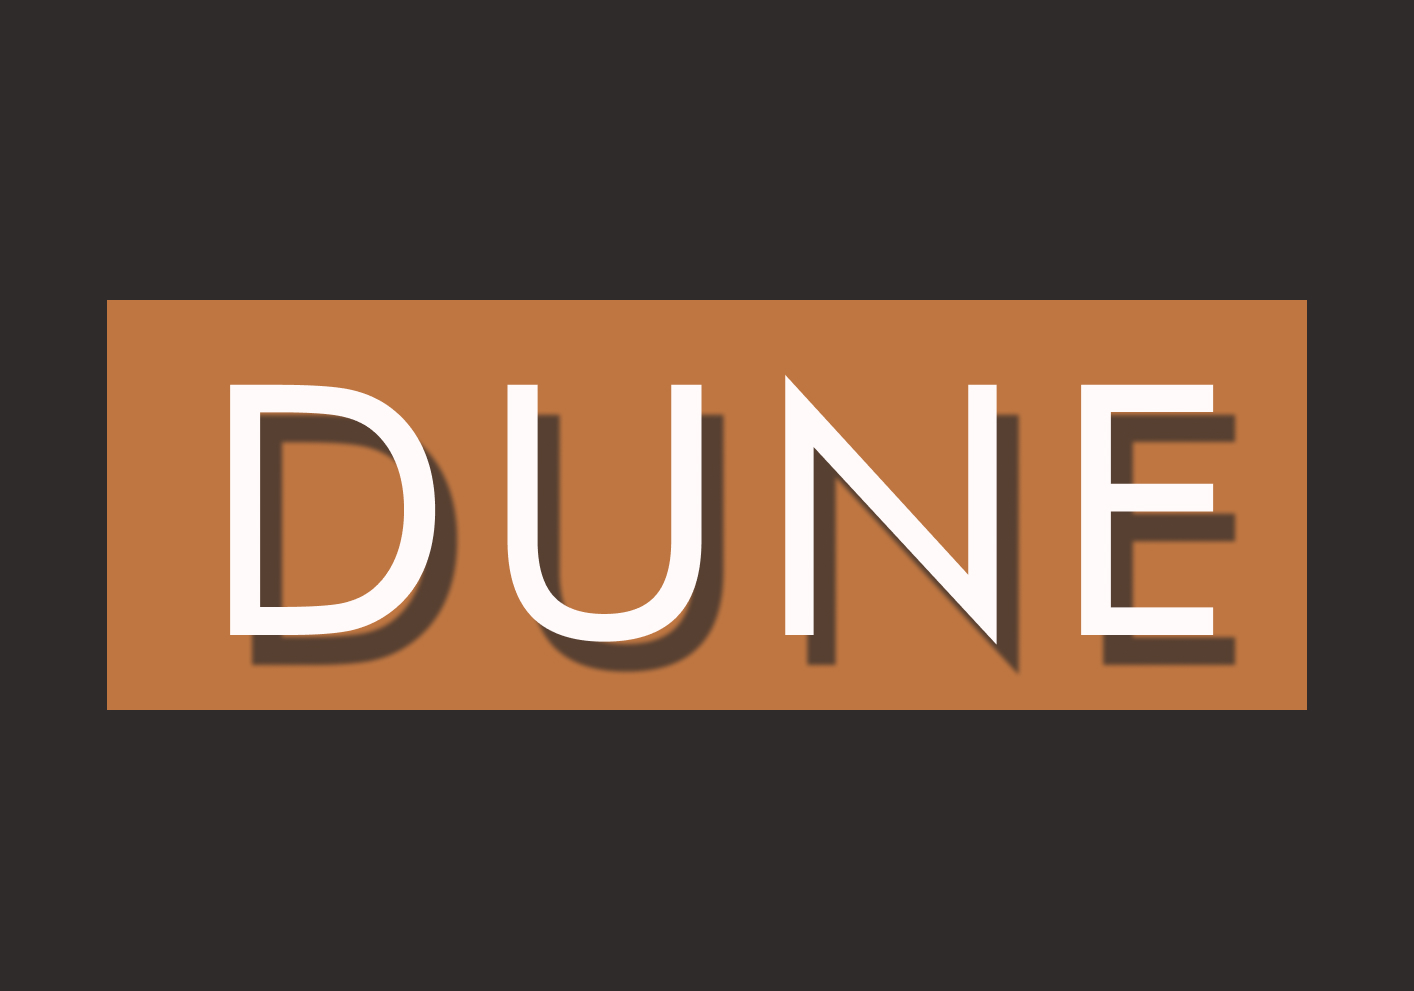 A thumbnail for the Dune project. Dune written capital letters on a orange and black background.